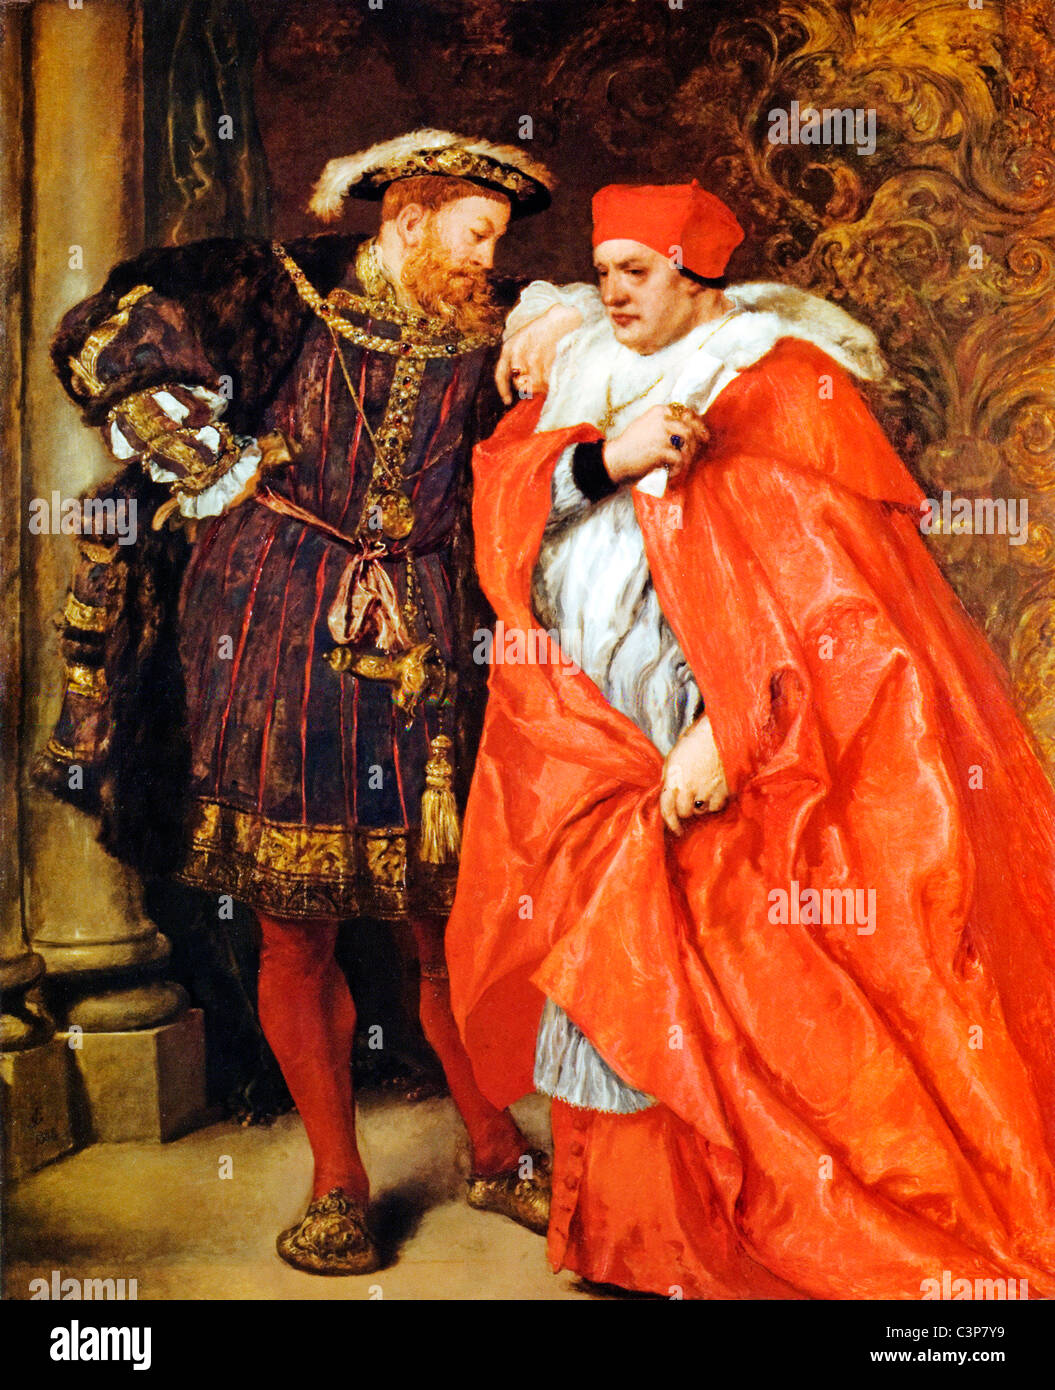 Henry VIII and Cardinal Wolsey, painting by Sir John Gilbert in 1888, Ego et Rex Meus, Me and My King Stock Photo